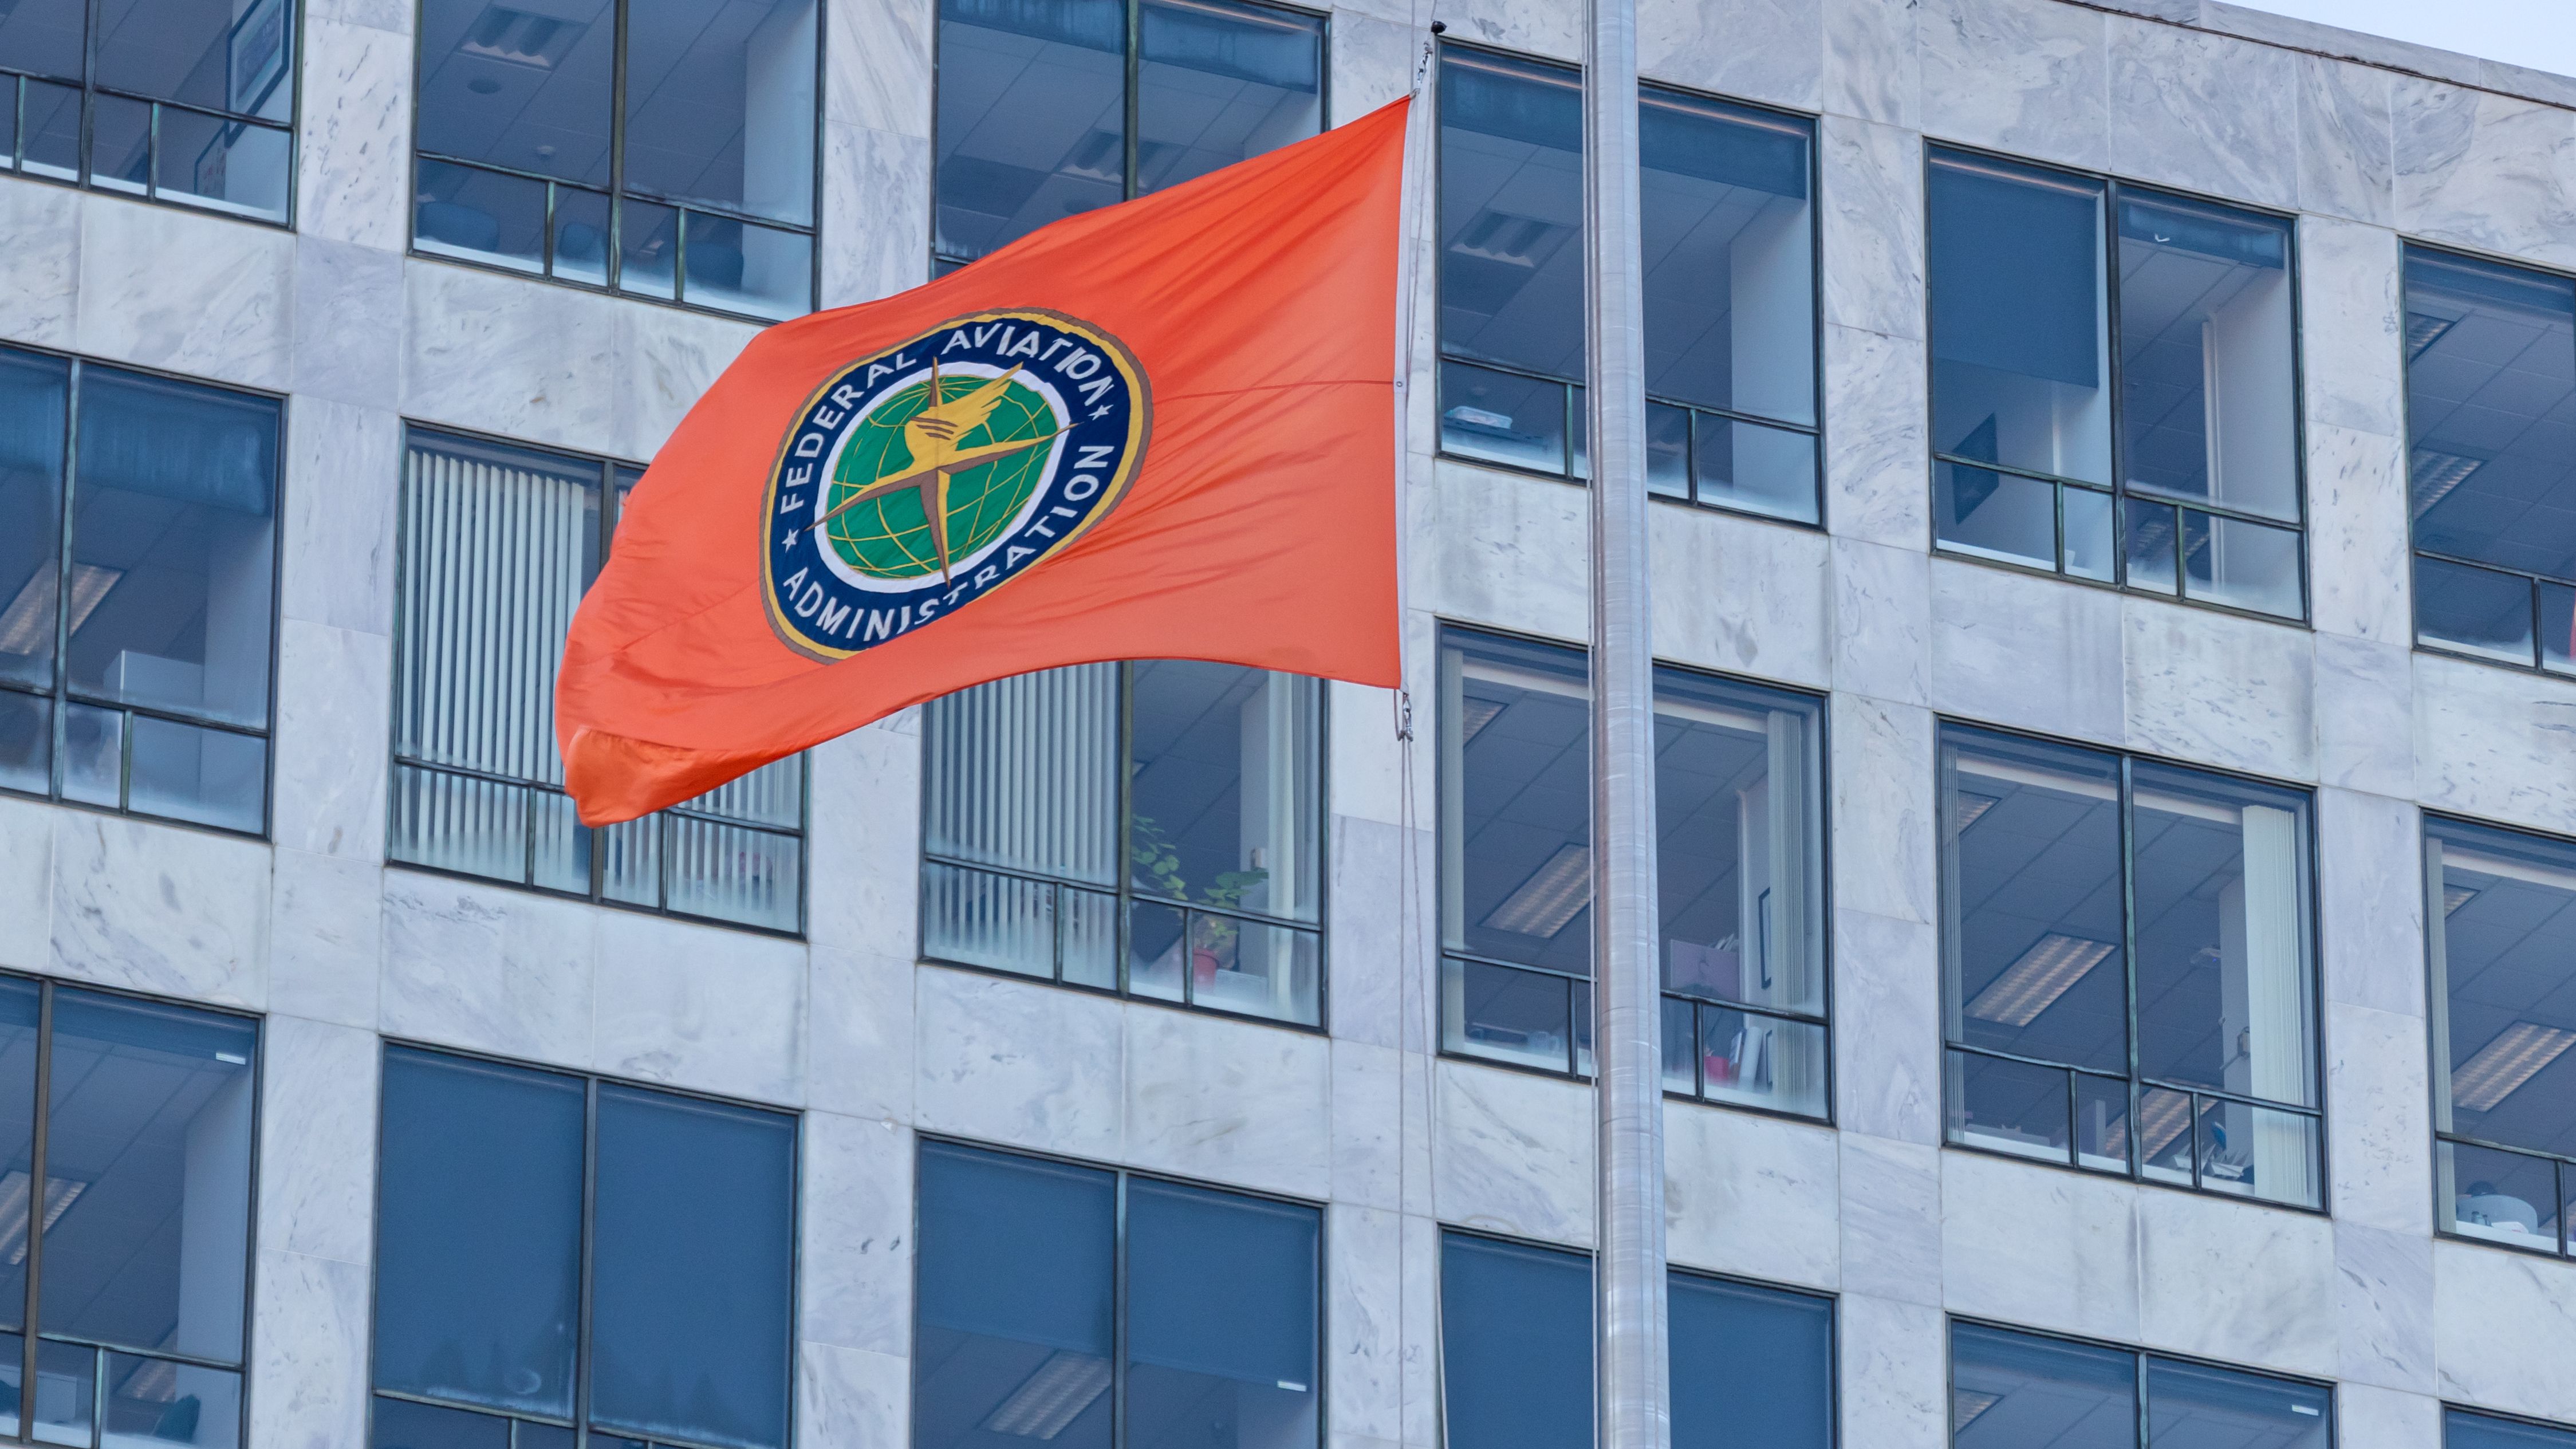 The FAA flag in front of the related government building.